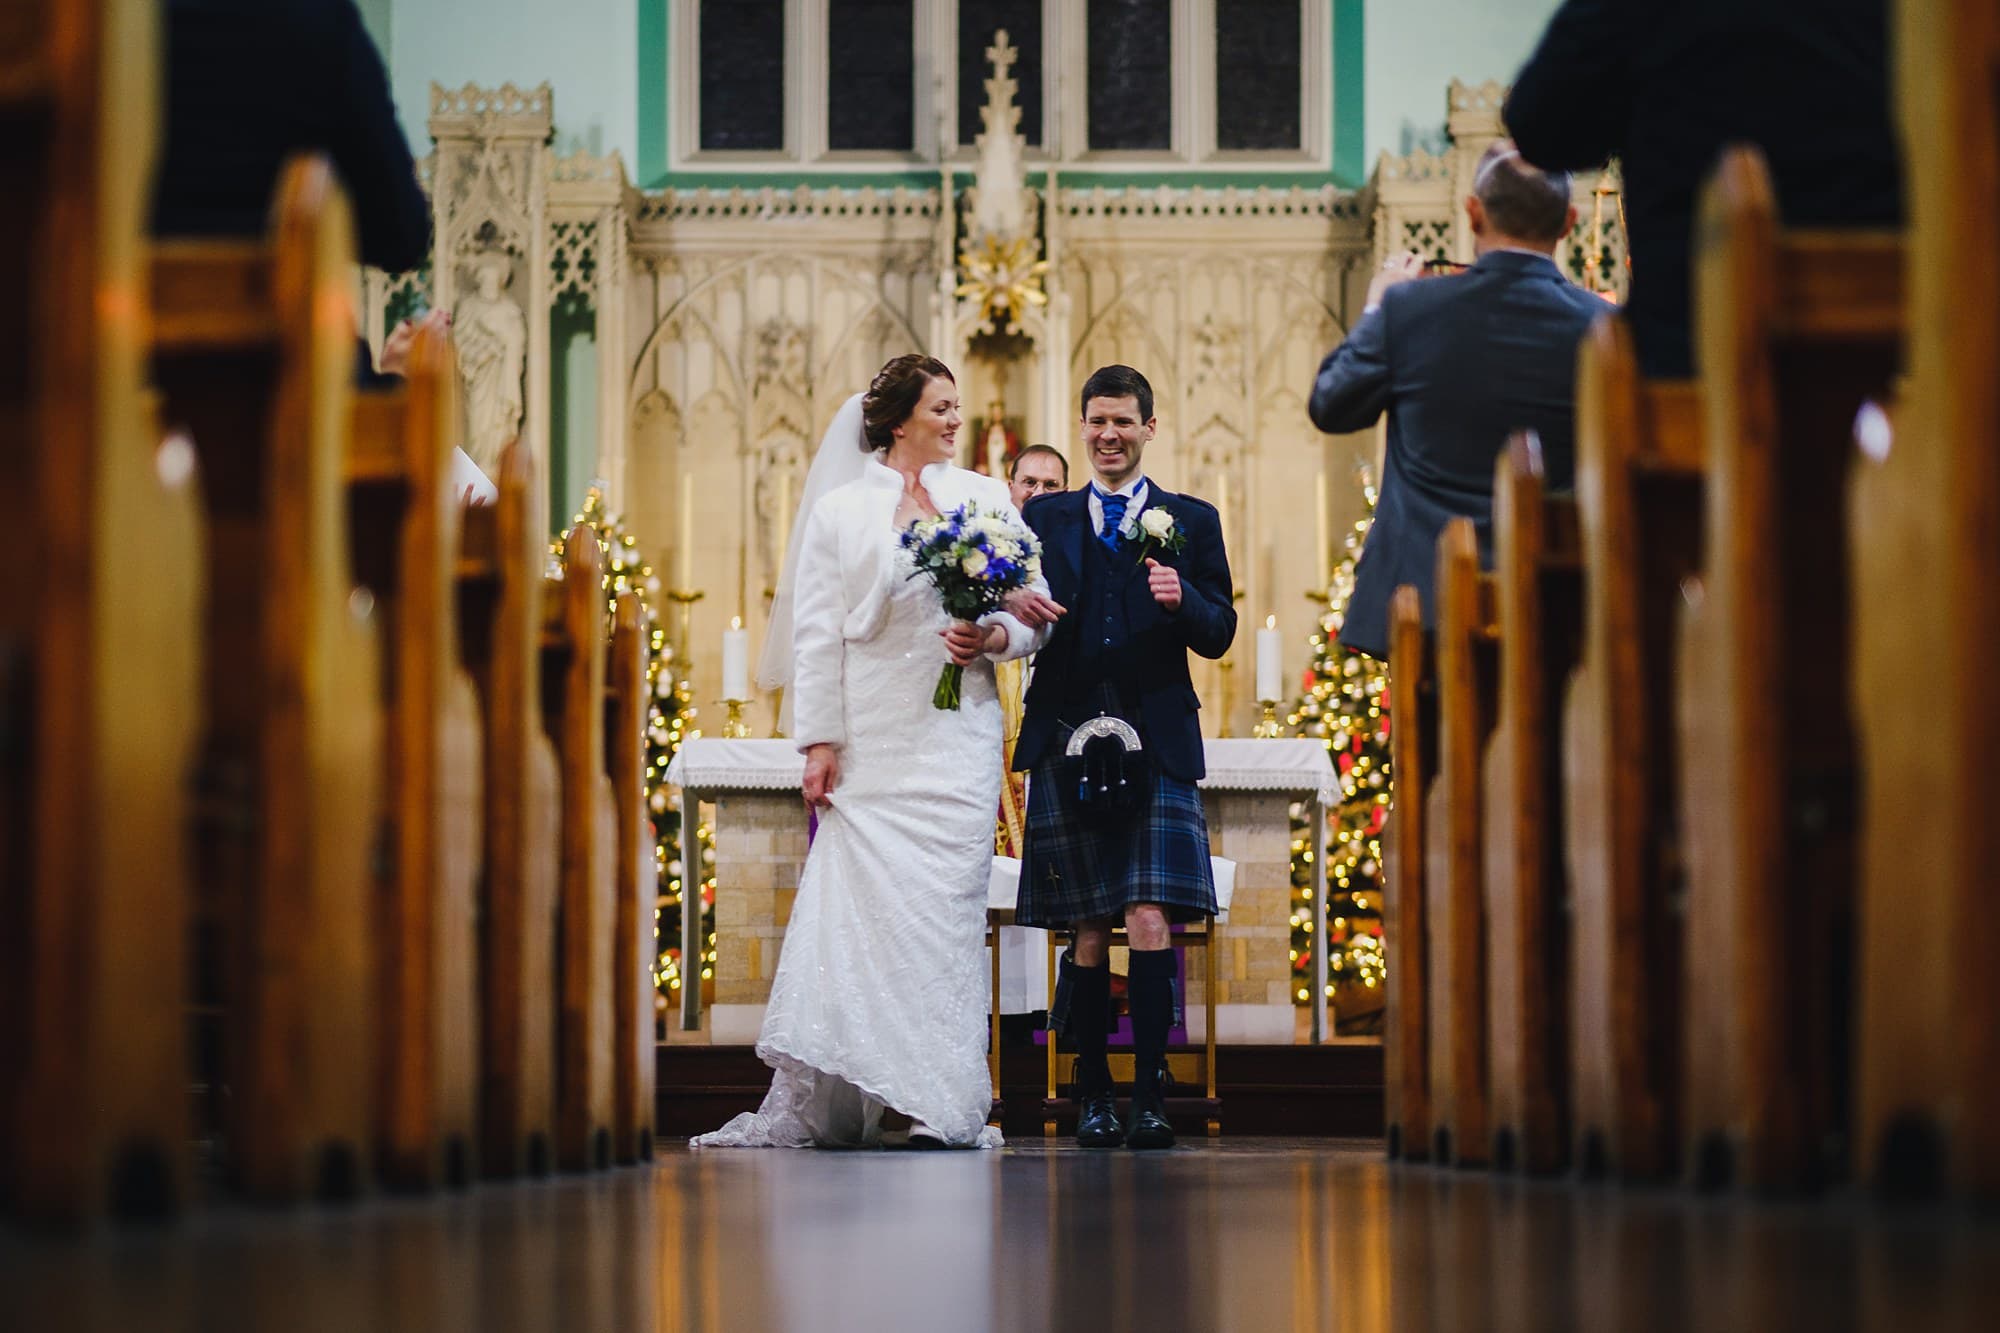 a low-angle wedding photograph showing a grinning bride and groom walking down the aisle after getting married, by London photographer Owen Billcliffe